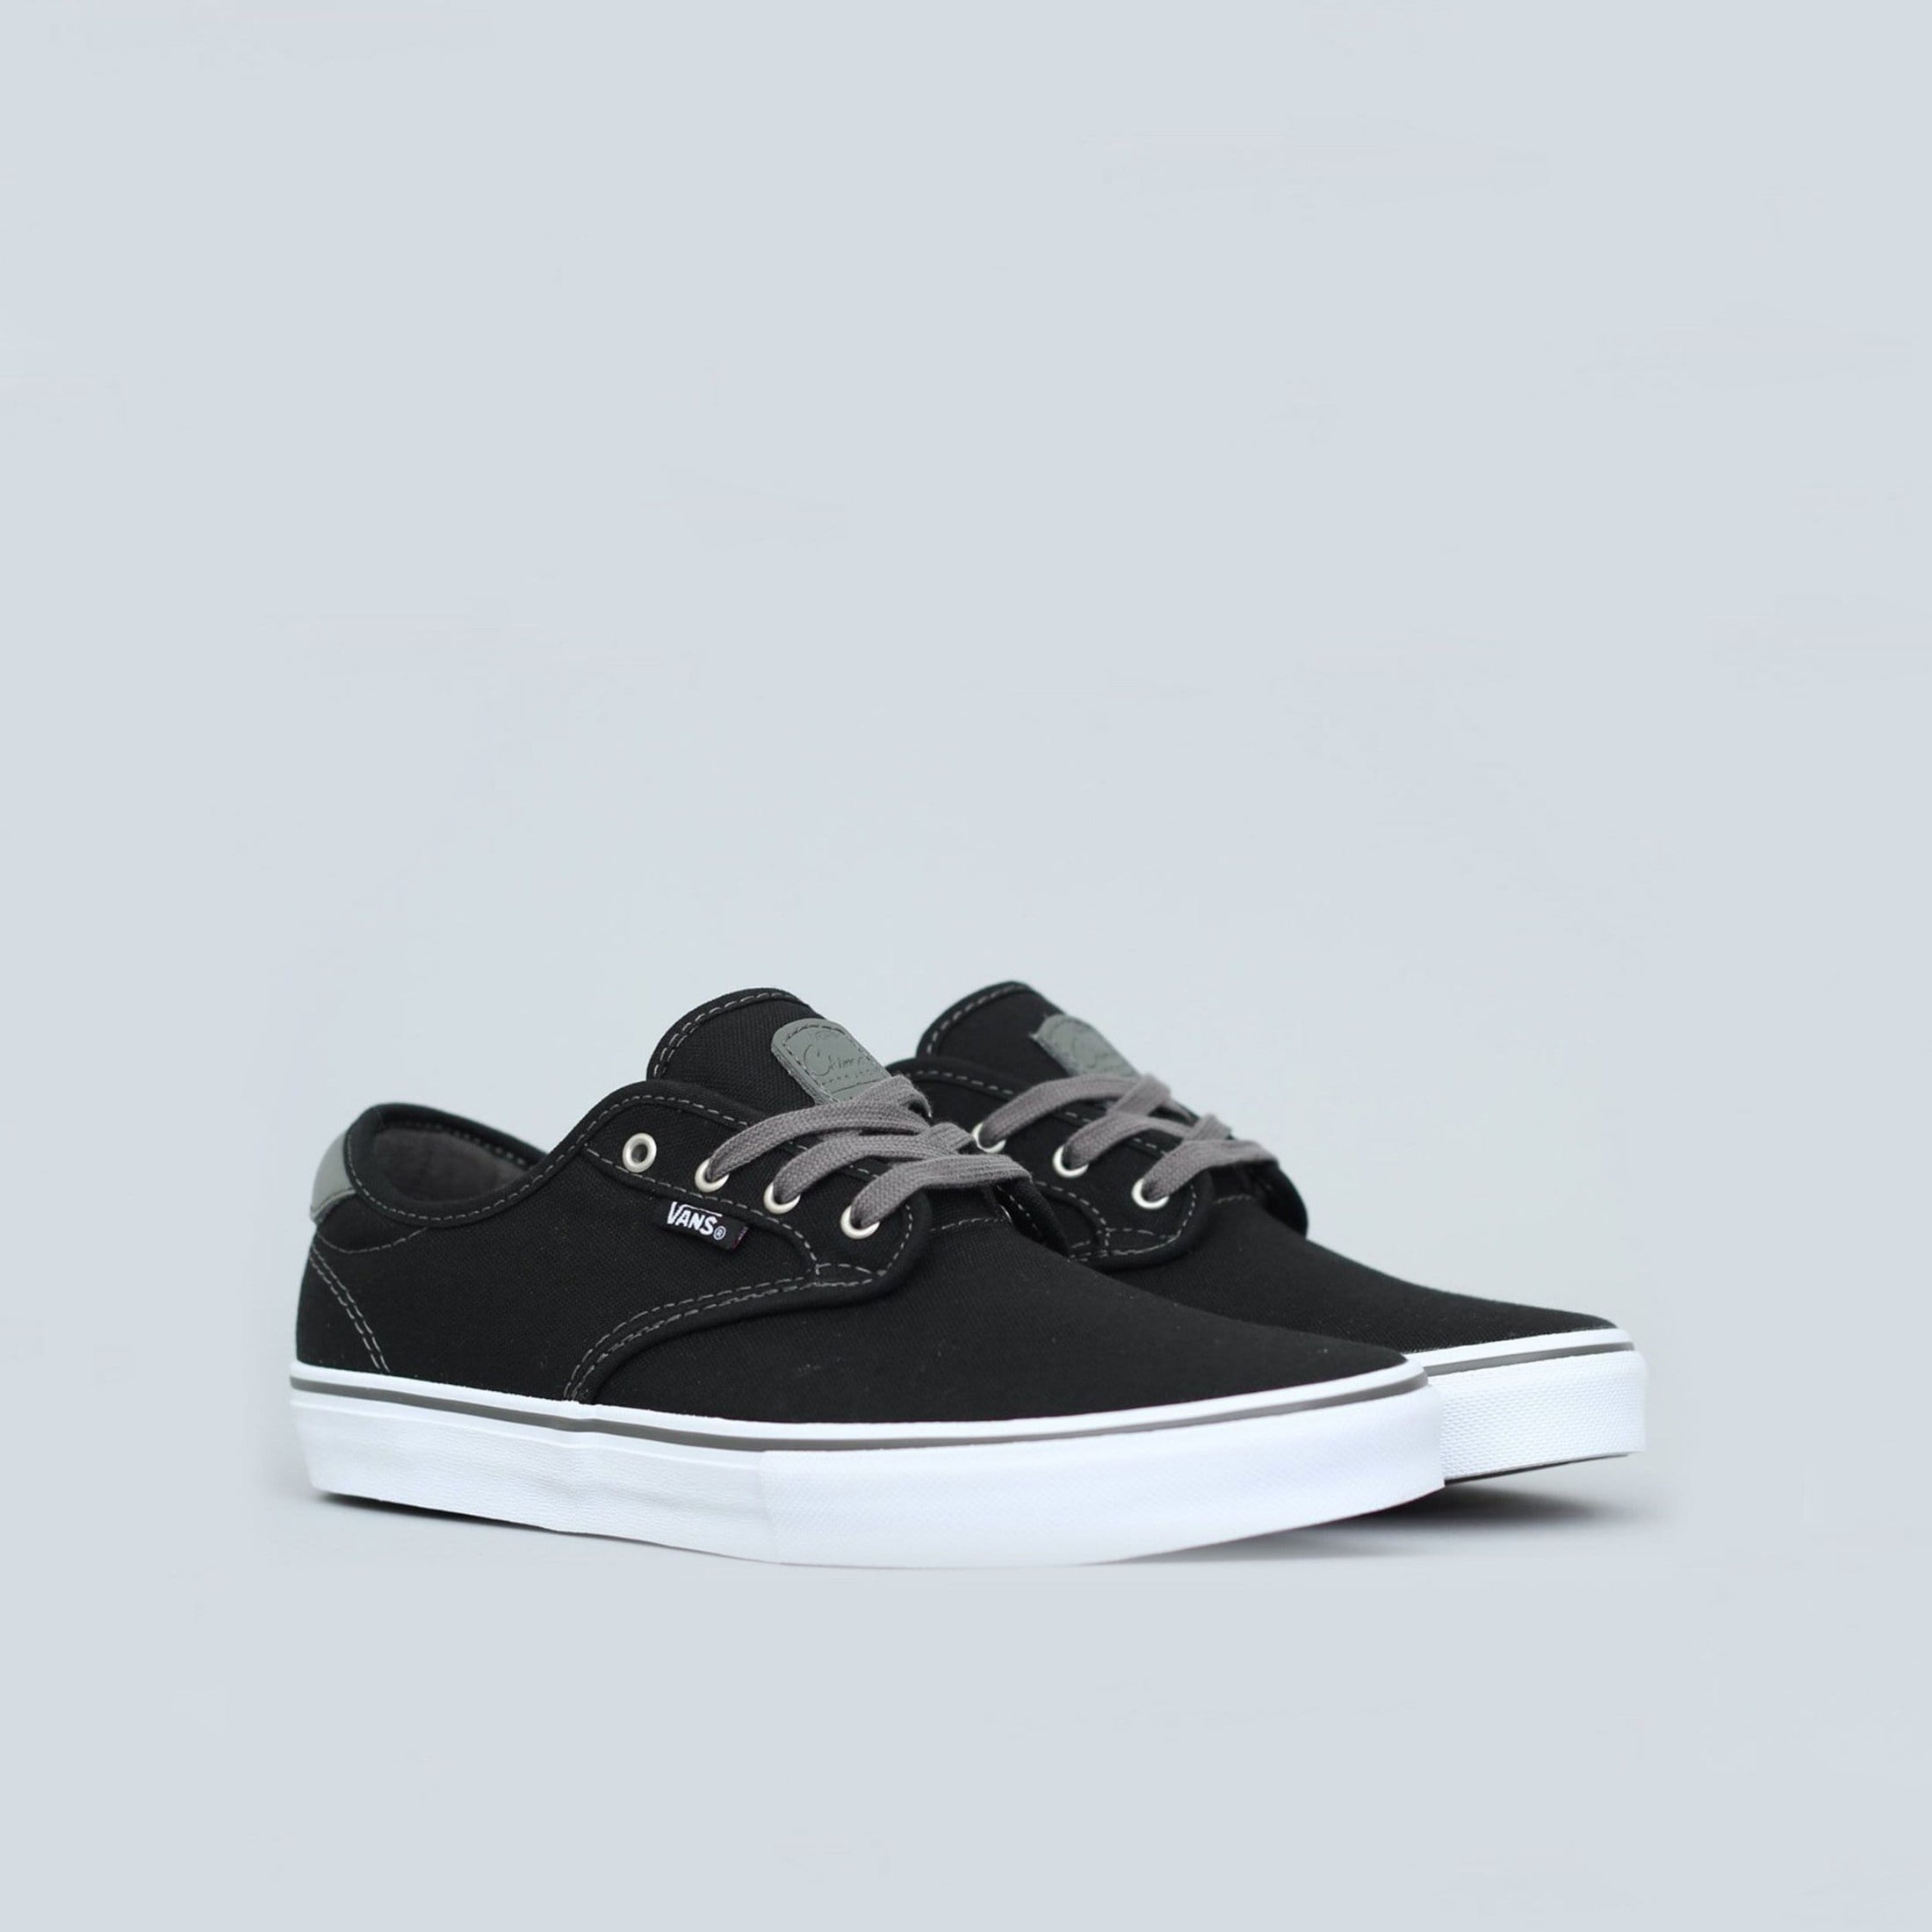 Vans Chima Pro Youth Shoes Black / Charcoal / White